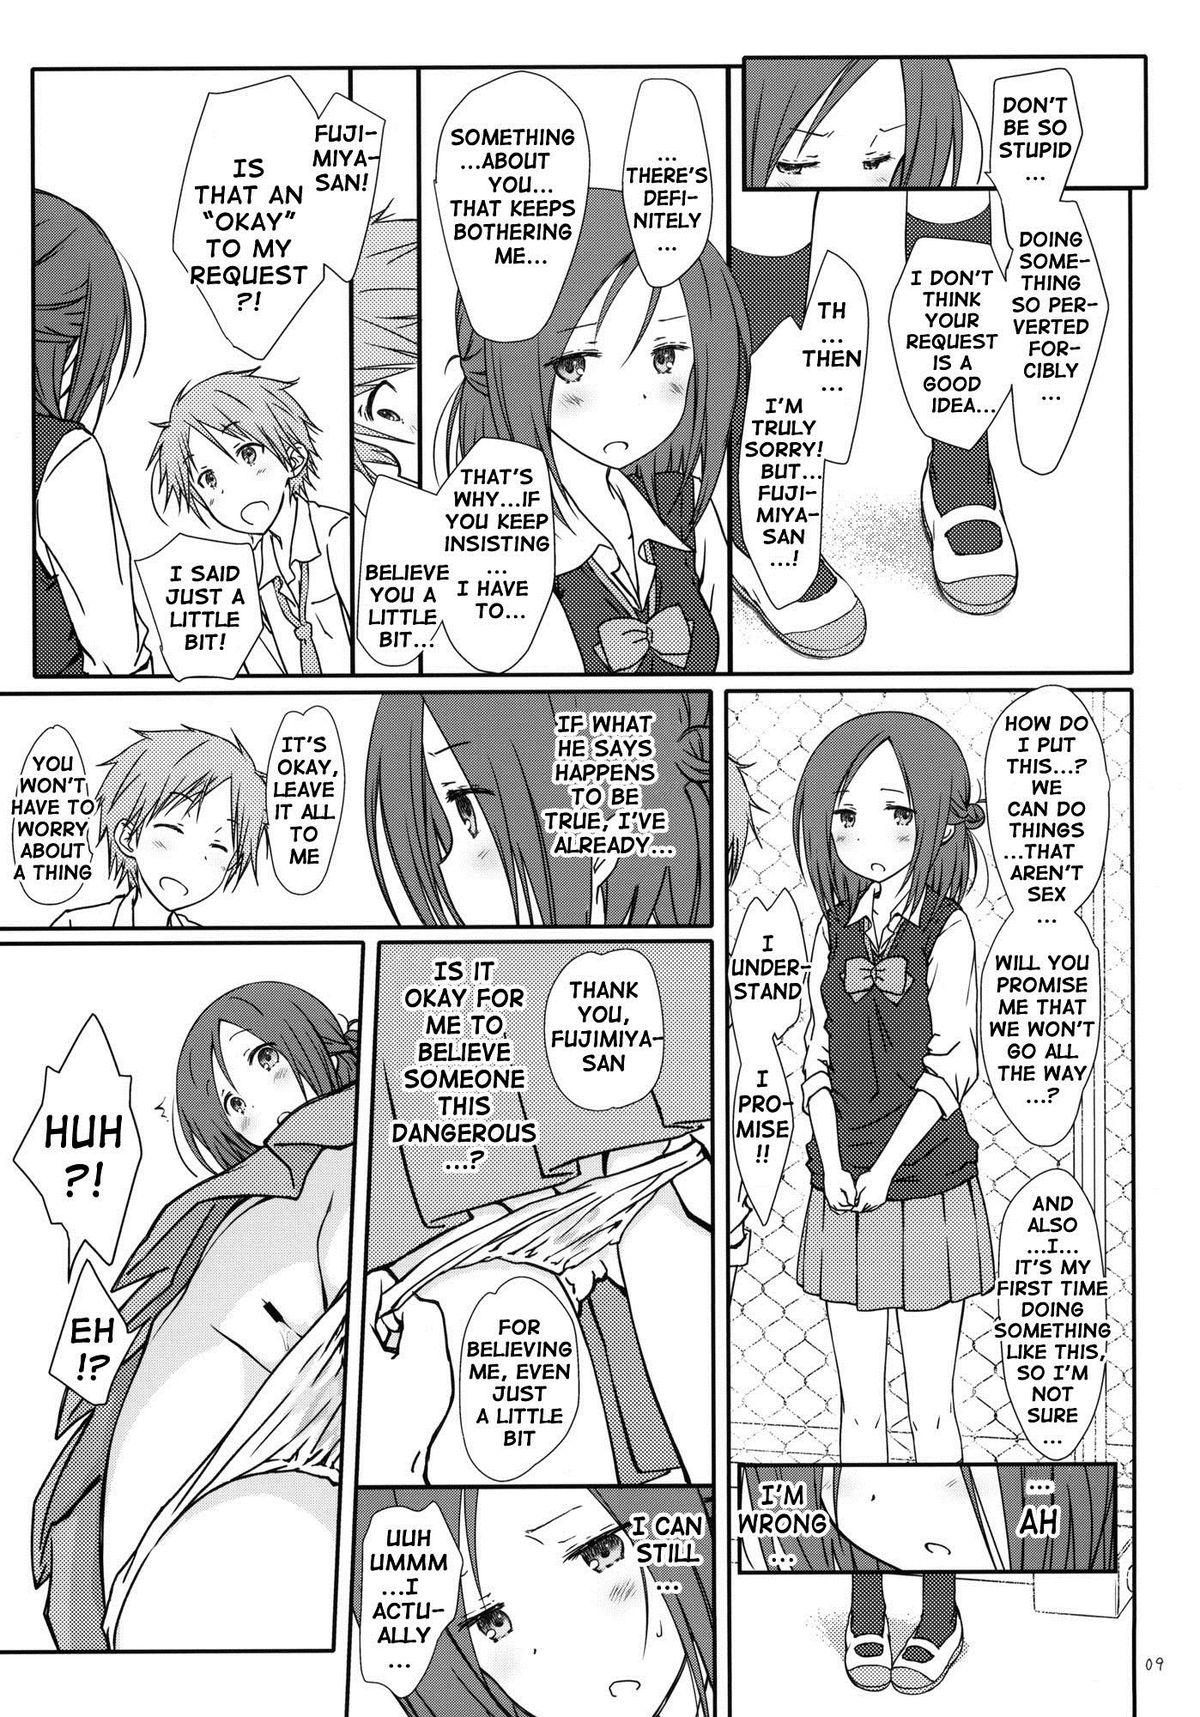 Money Talks "Tomodachi to no Sex." | Sex With Friends - One week friends Best Blowjob - Page 8